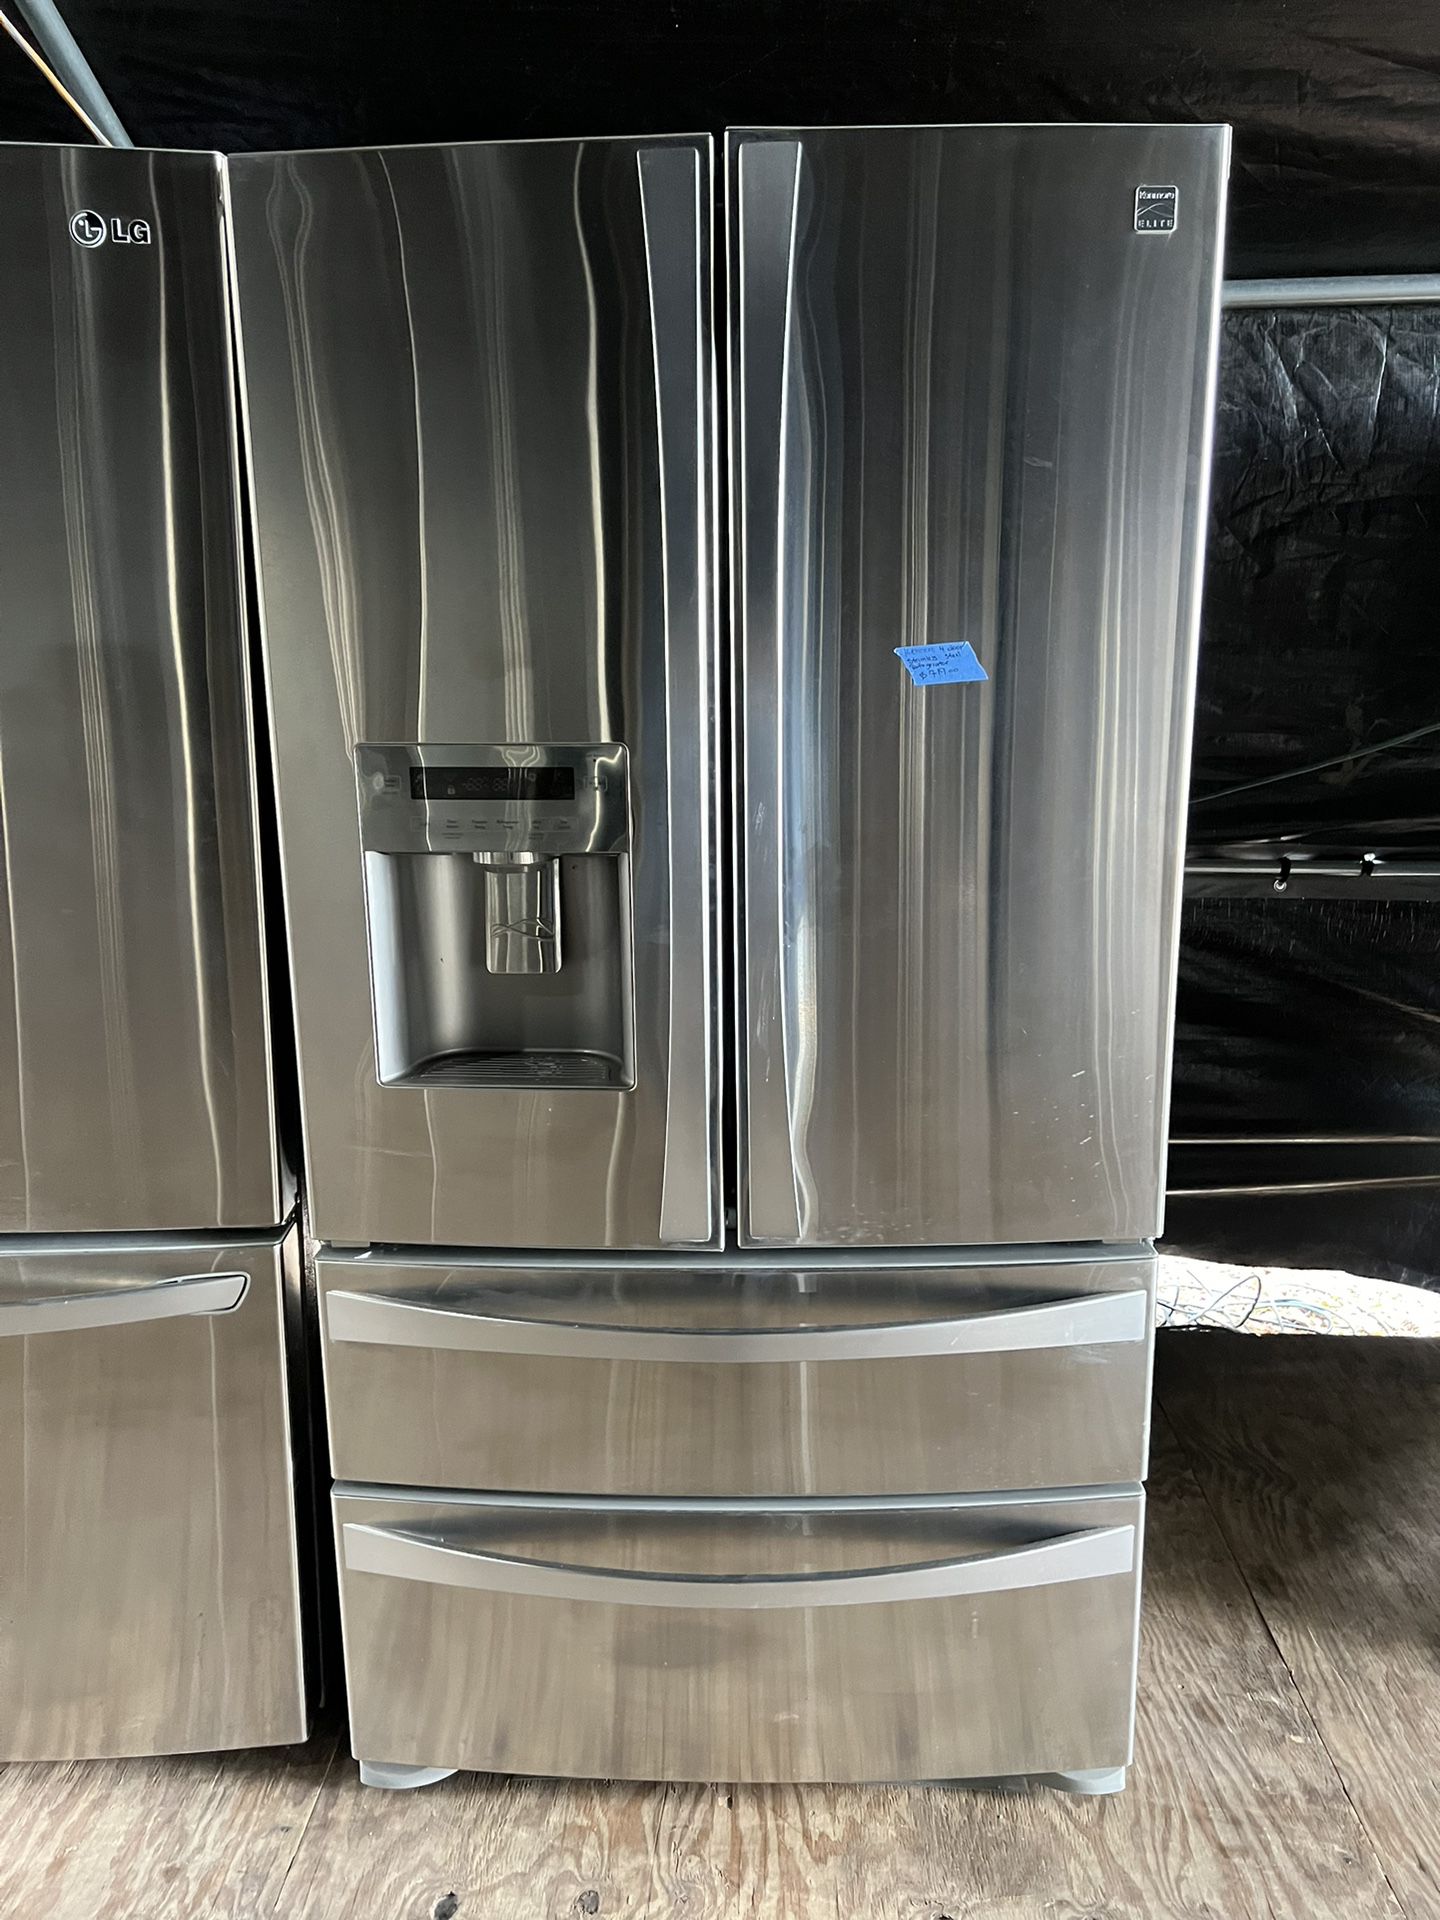 Kenmore 4 Door Stainless Steel Refrigerator Everything Is Working 60 Day Warranty Located At:📍5415 CARMACK RD TAMPA FL 33610📍